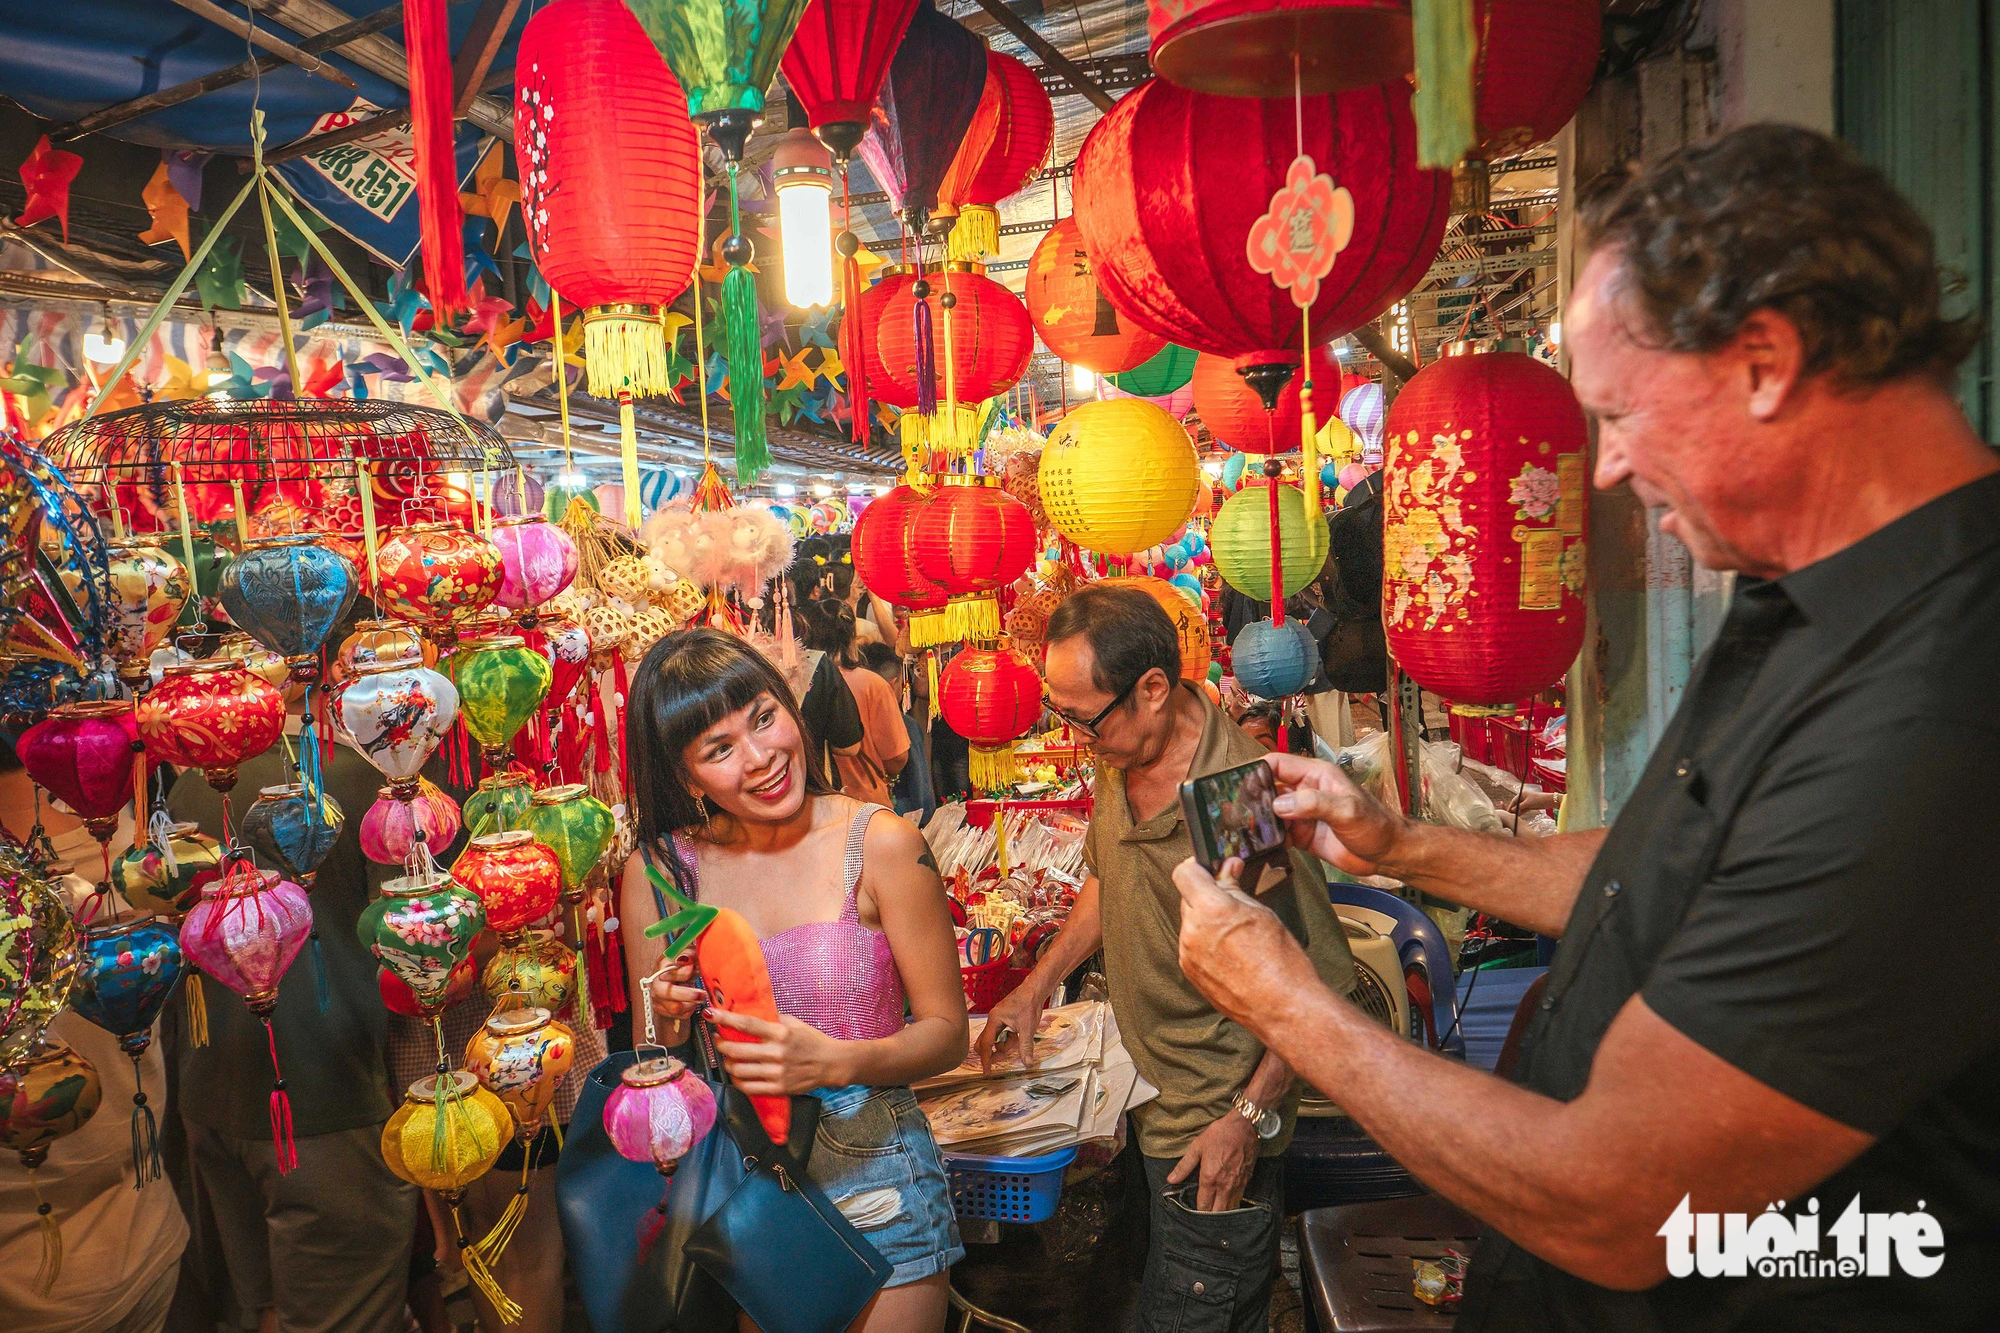 Lantern village in Ho Chi Minh City busy ahead of Mid-Autumn Festival